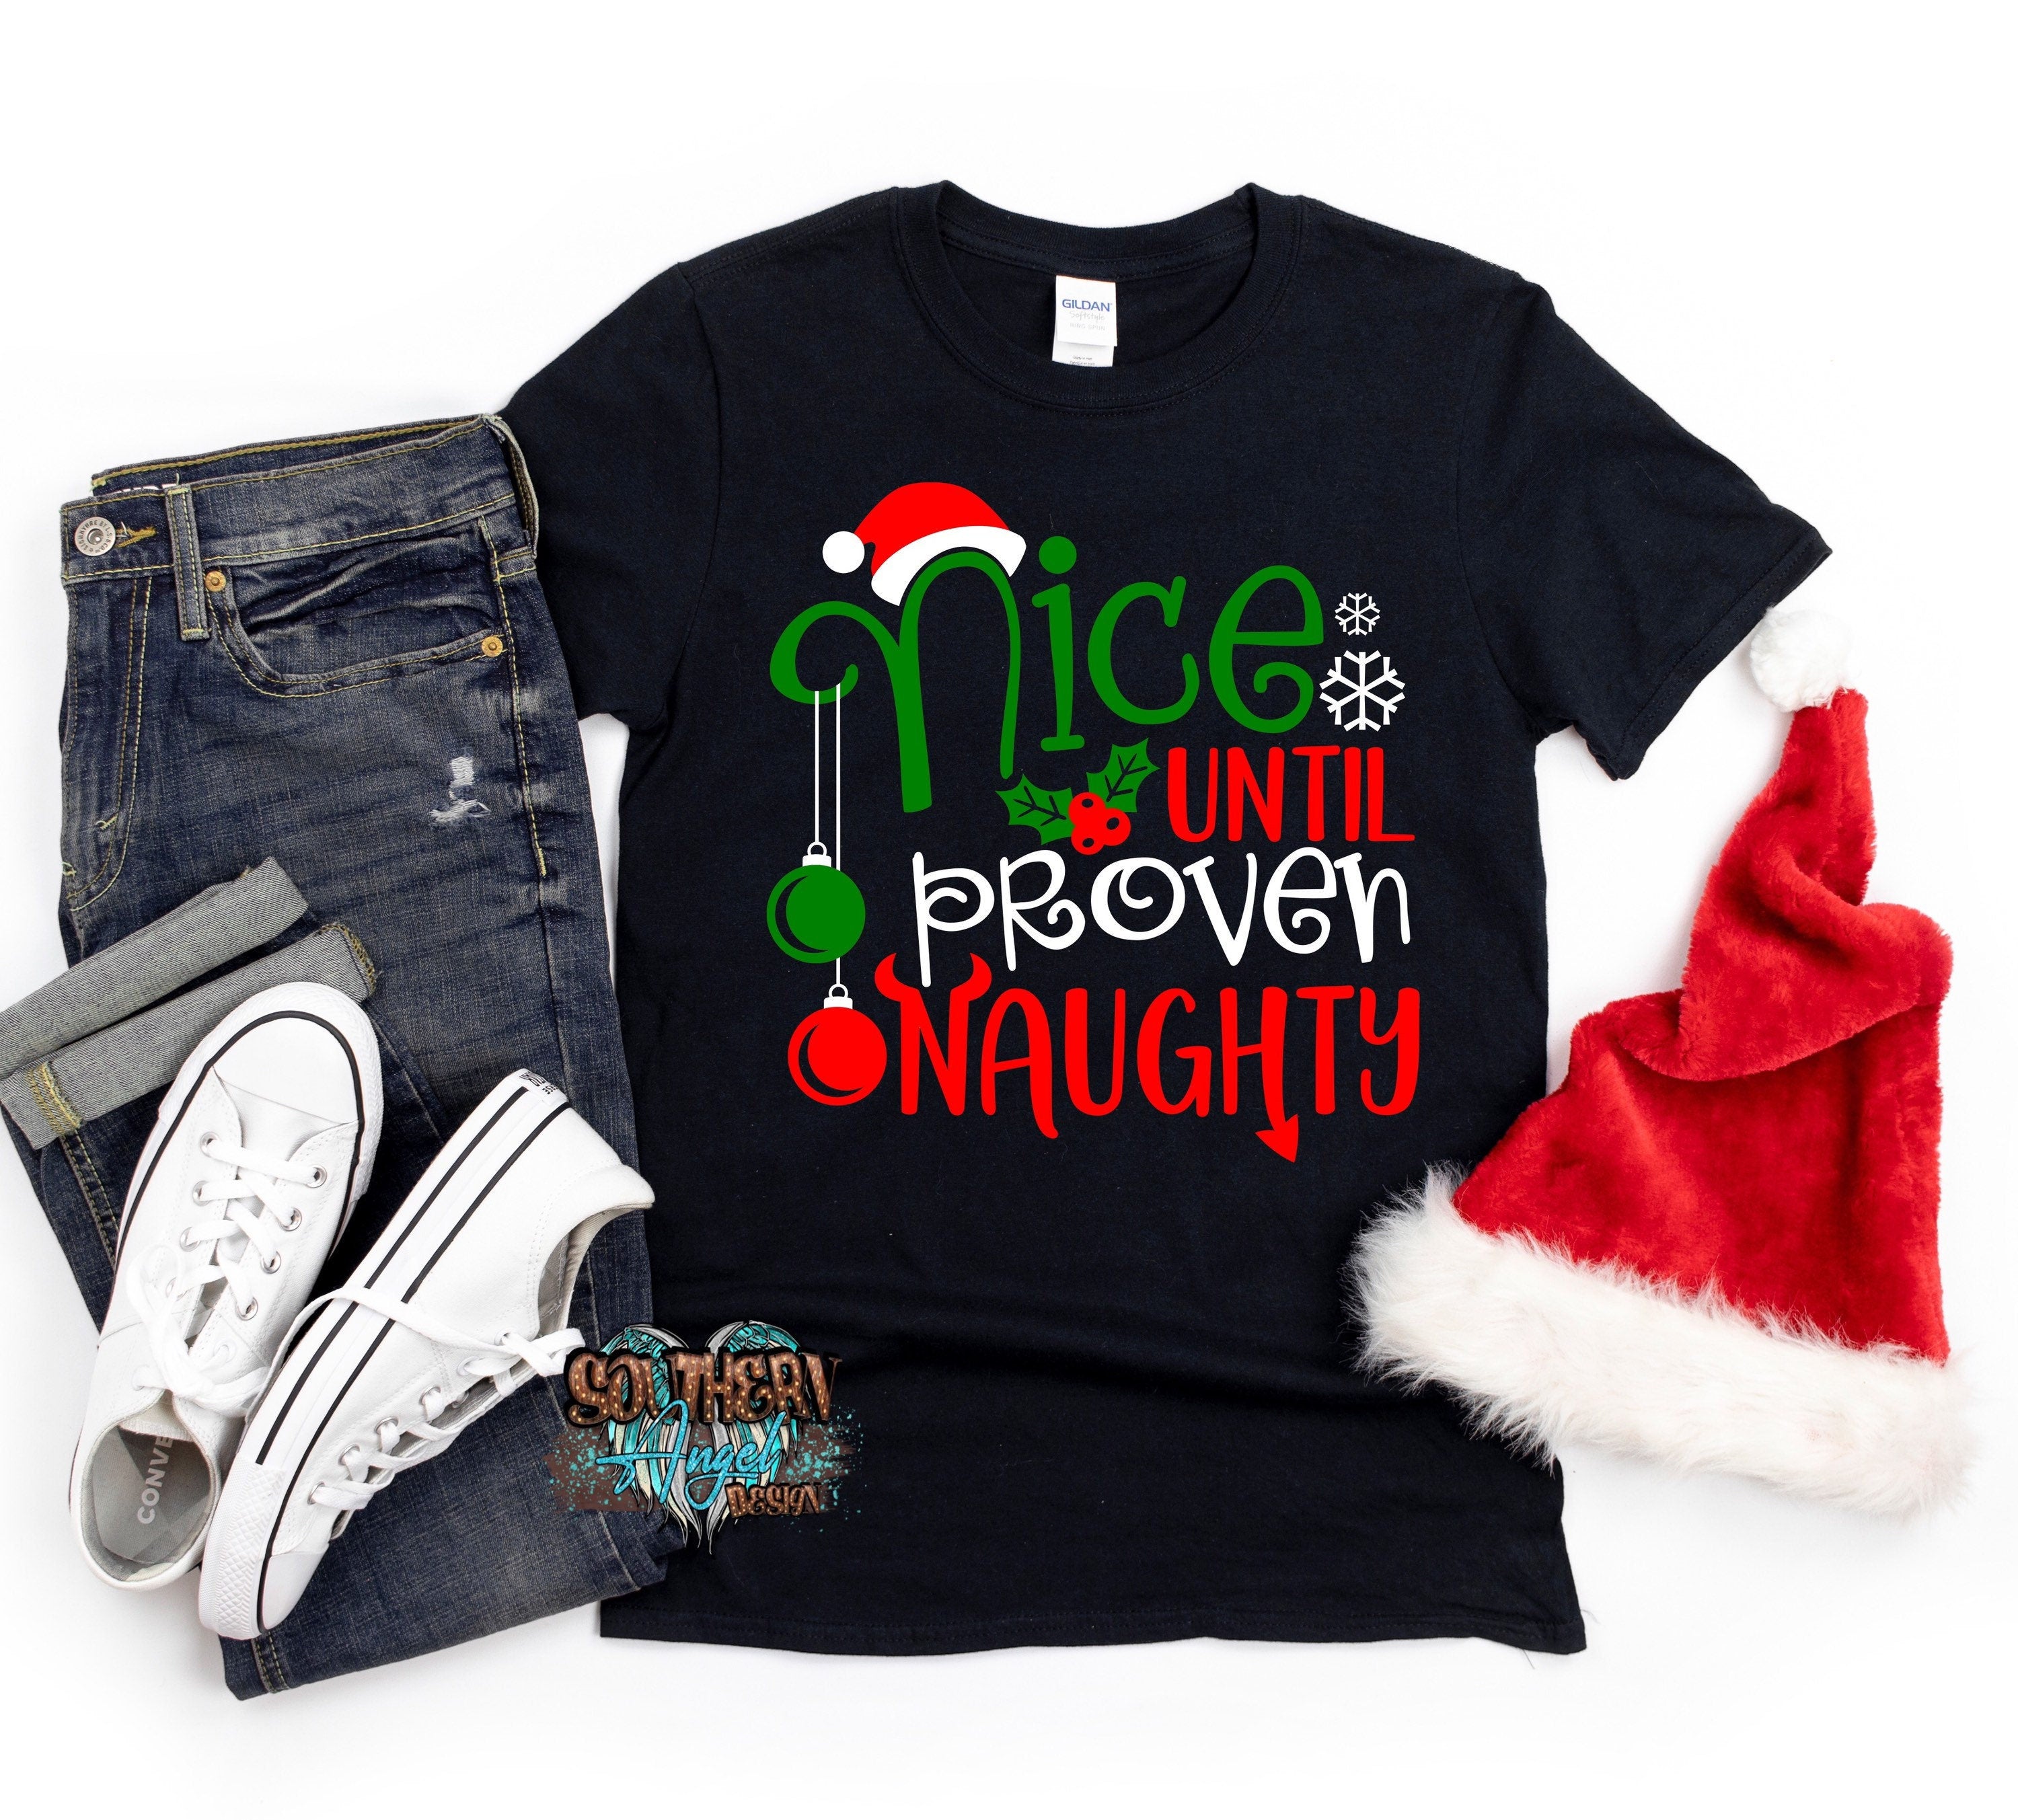 Kid’s Christmas shirt | Nice until proven naughty shirt | Naughty or nice shirt | toddler Christmas shirt | Kids Personalized Christmas |